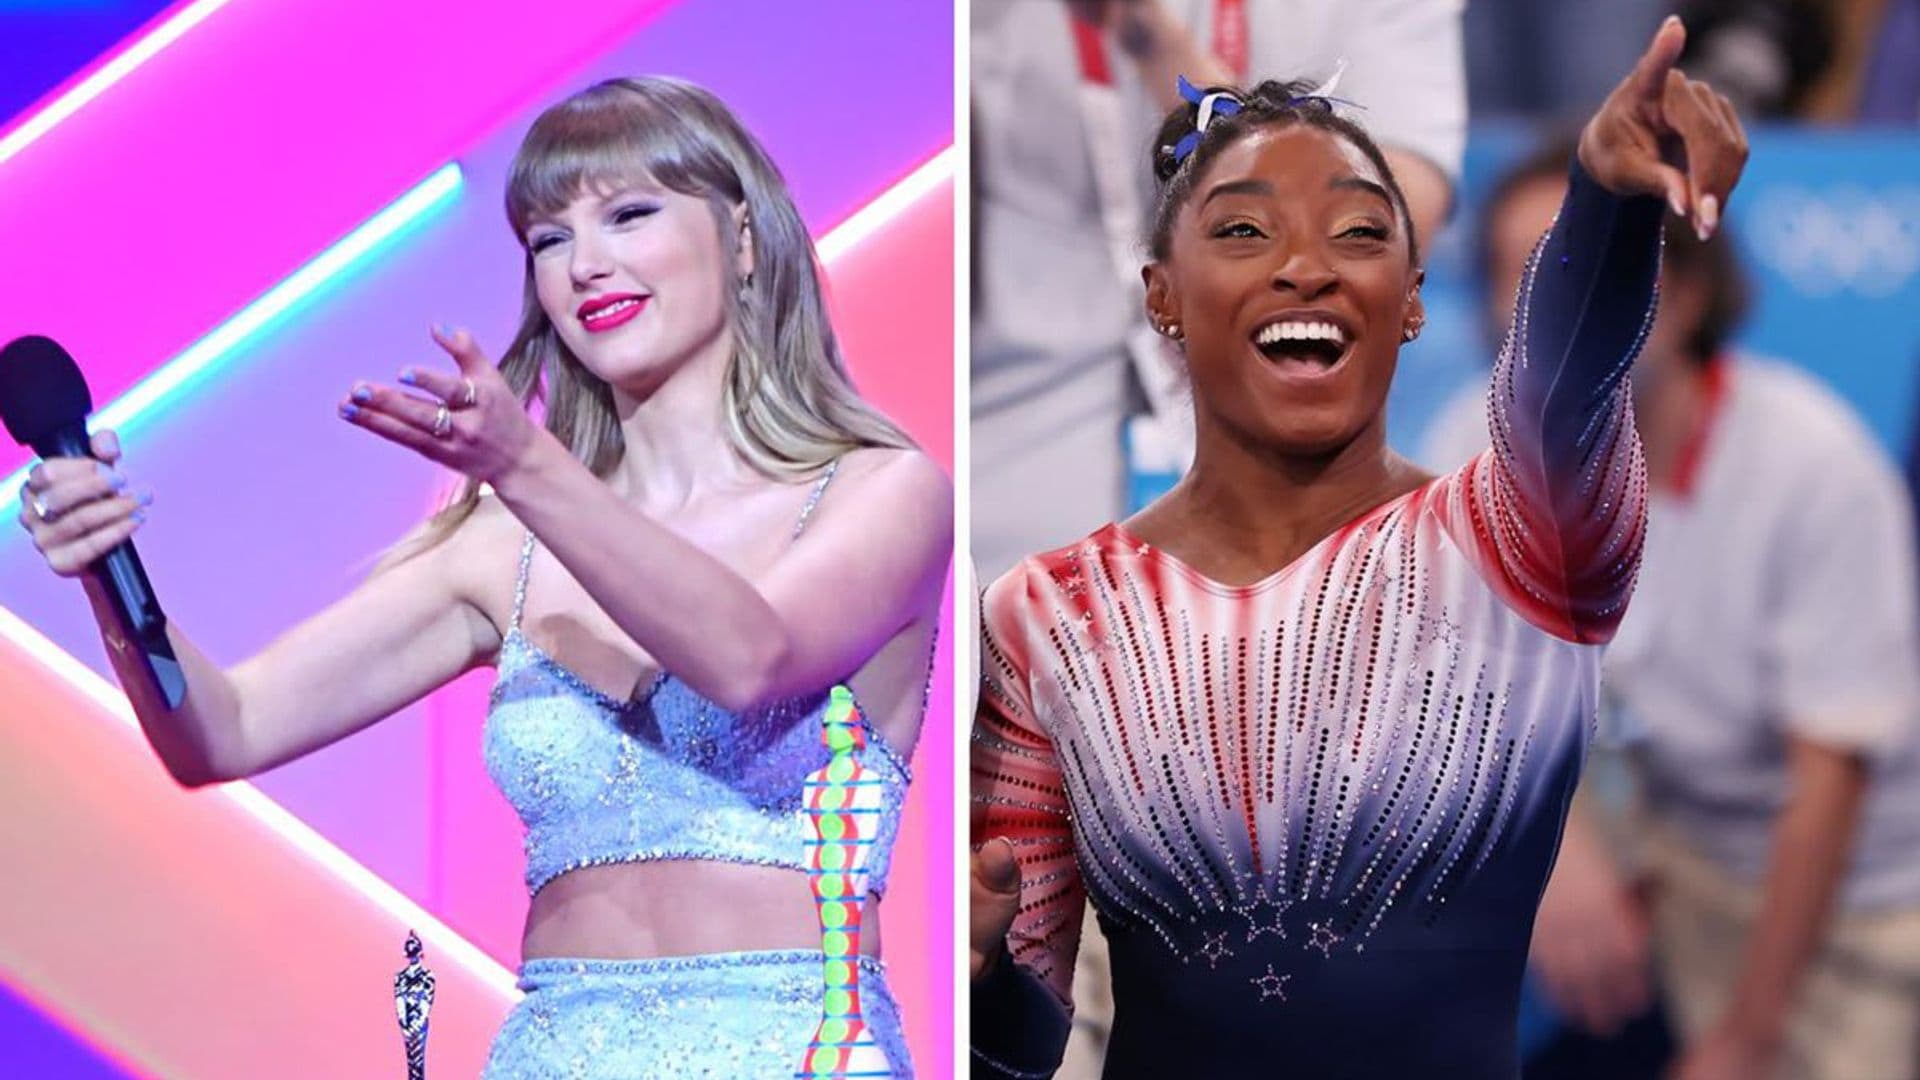 Taylor Swift pays special tribute to Simone Biles amid grand return to the Olympics